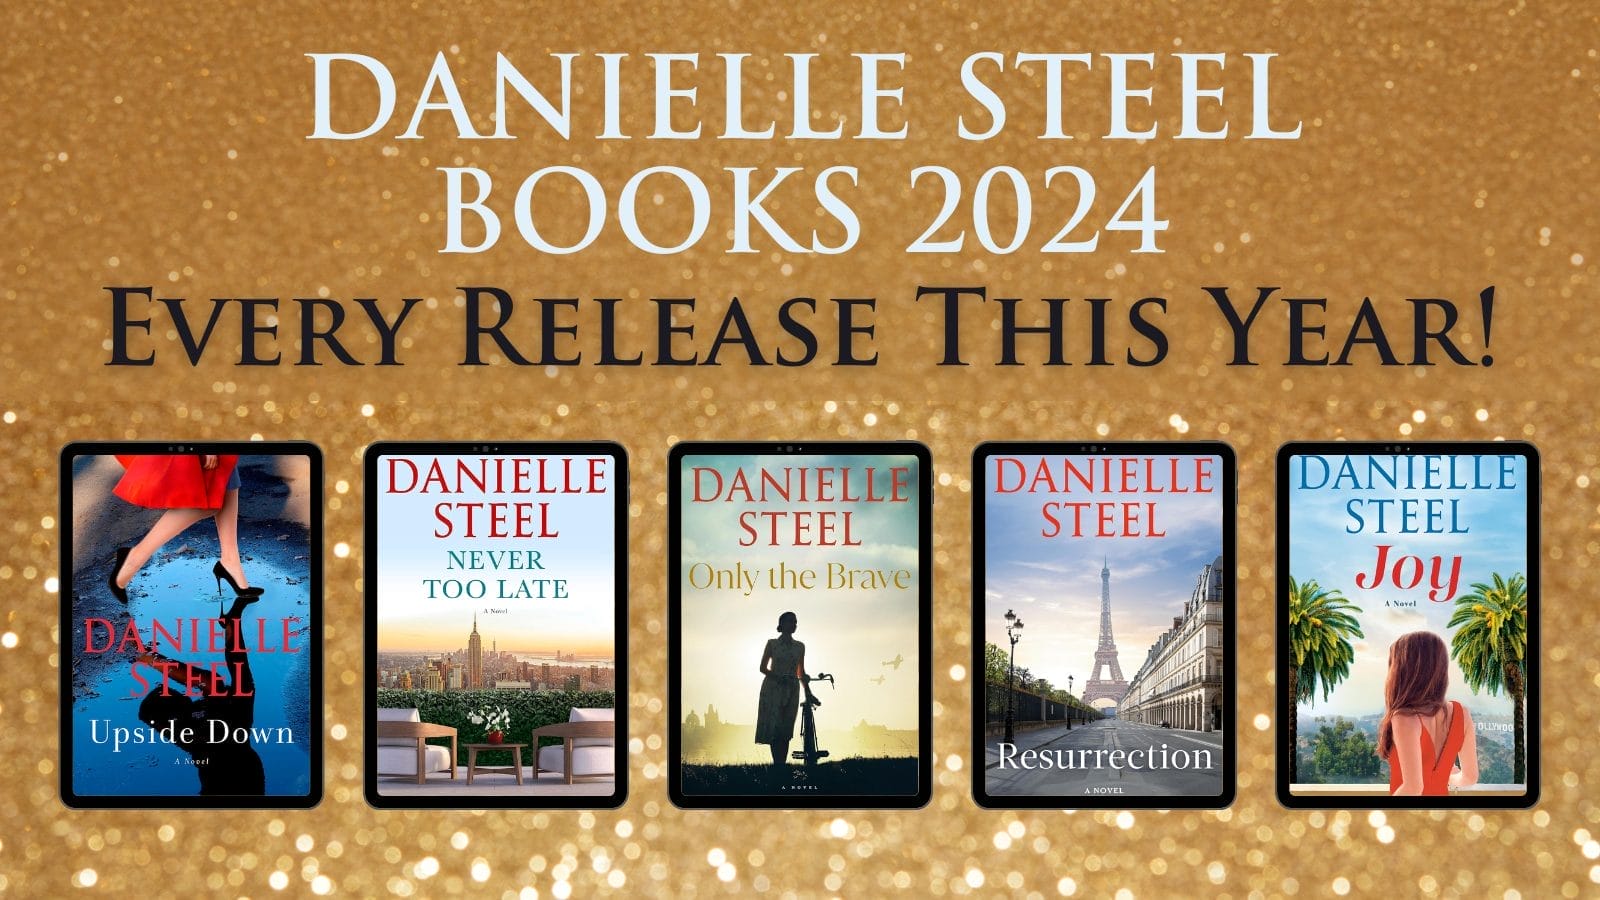 Danielle Steel Books 2024 Every New Release This Year